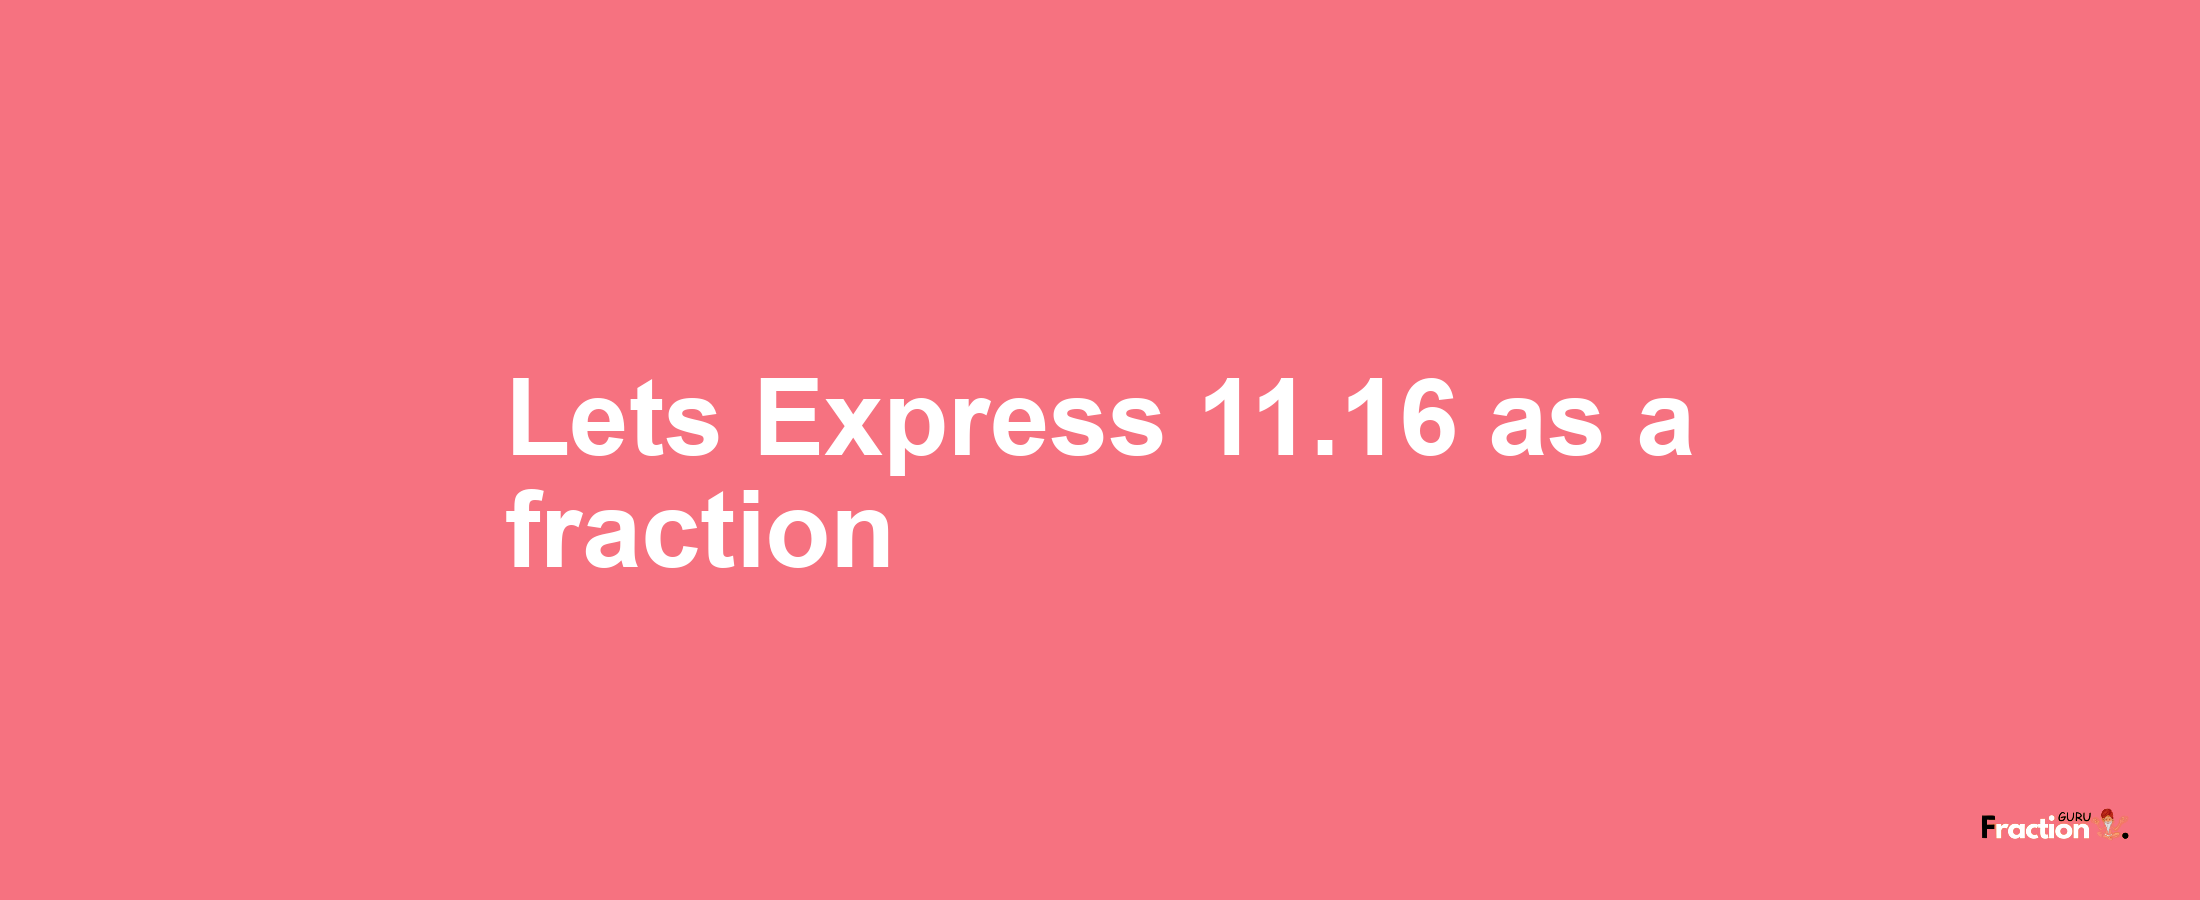 Lets Express 11.16 as afraction